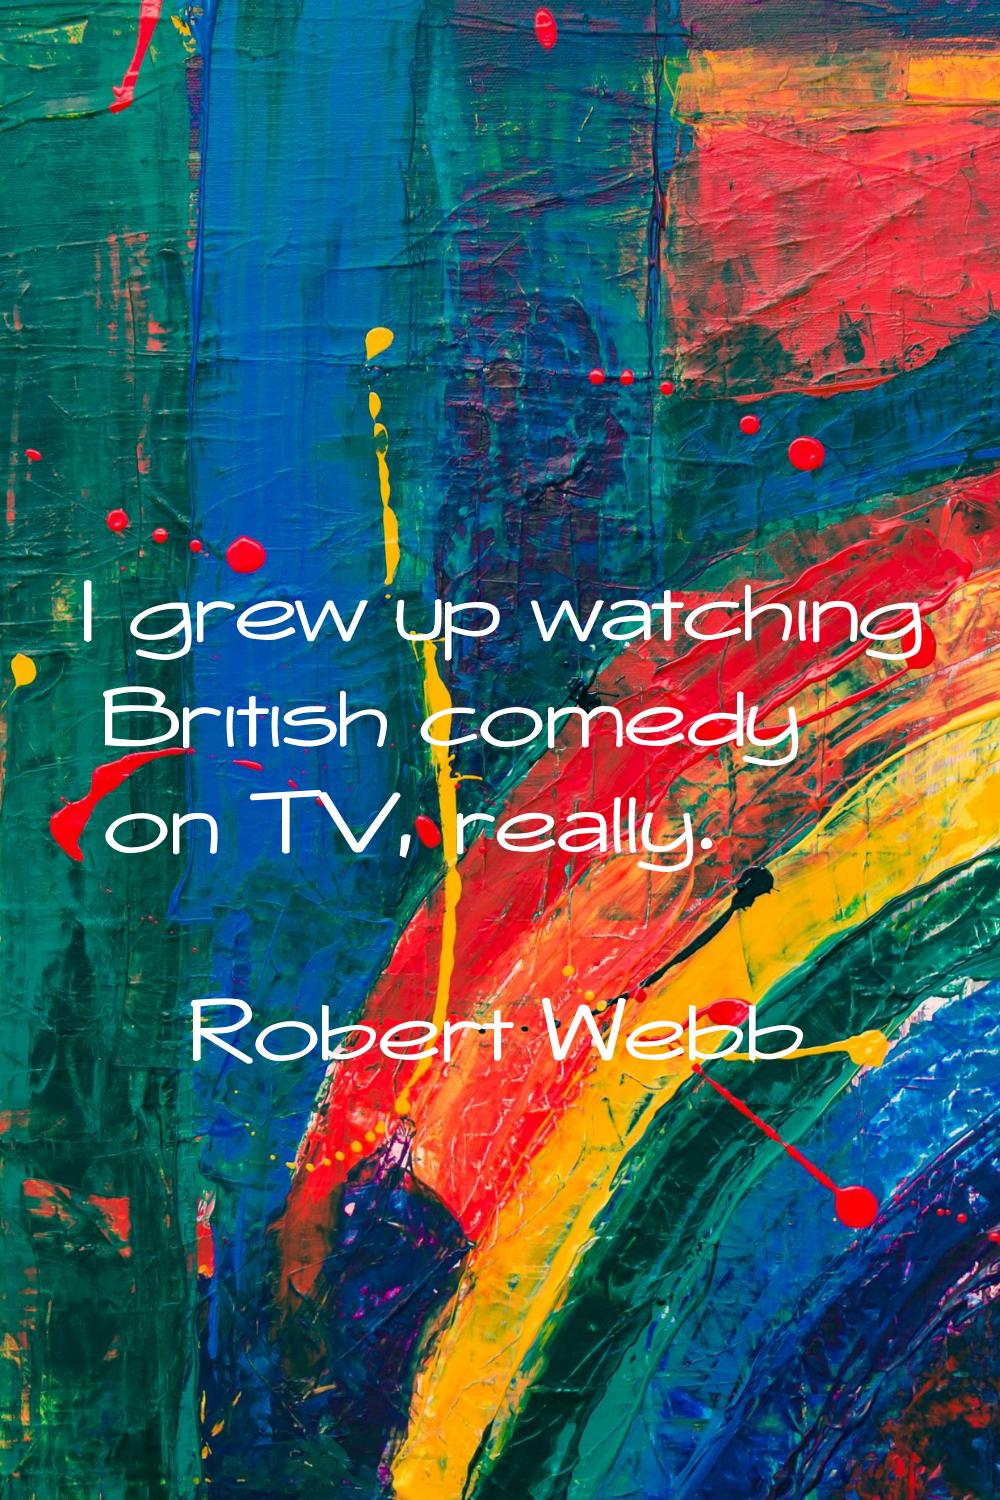 I grew up watching British comedy on TV, really.